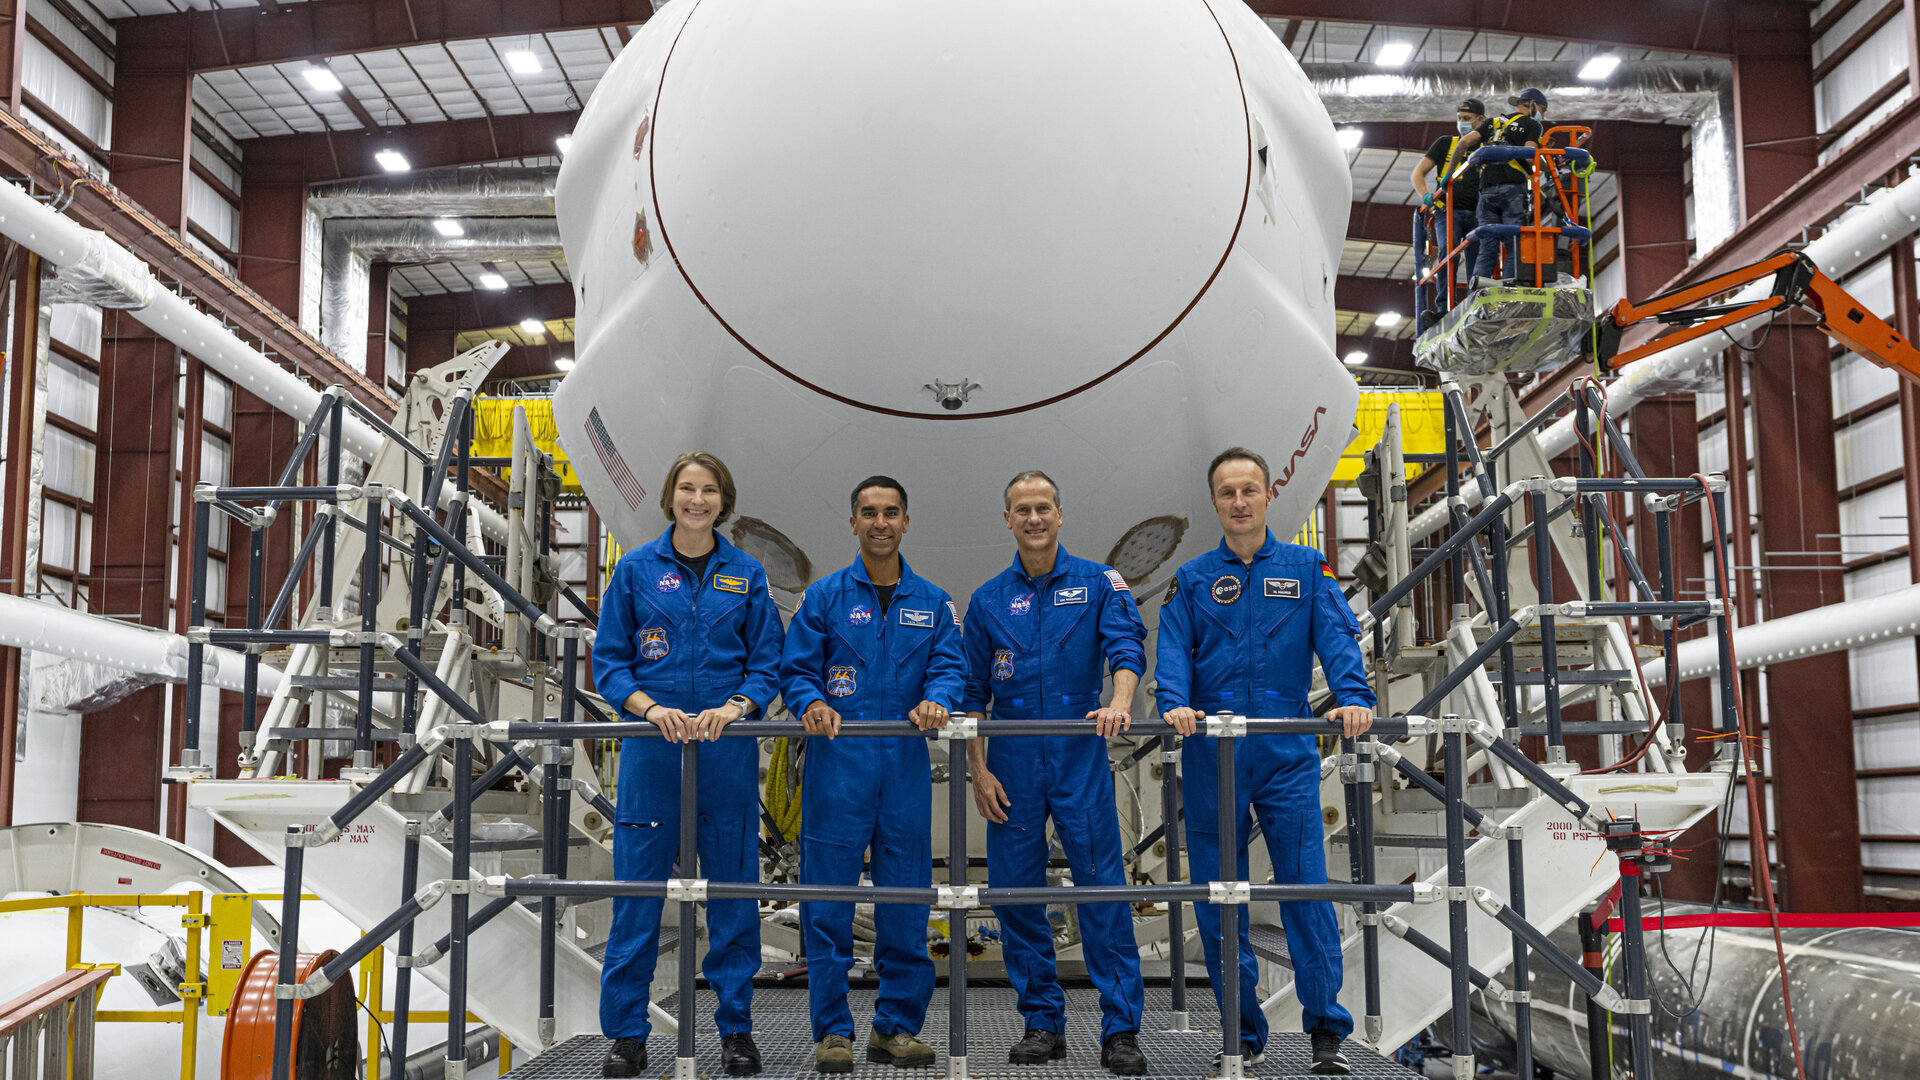 Crew-3 astronauts with their Crew Dragon Endurance spacecraft in Hangar 39A at NASA's Kennedy Space Center